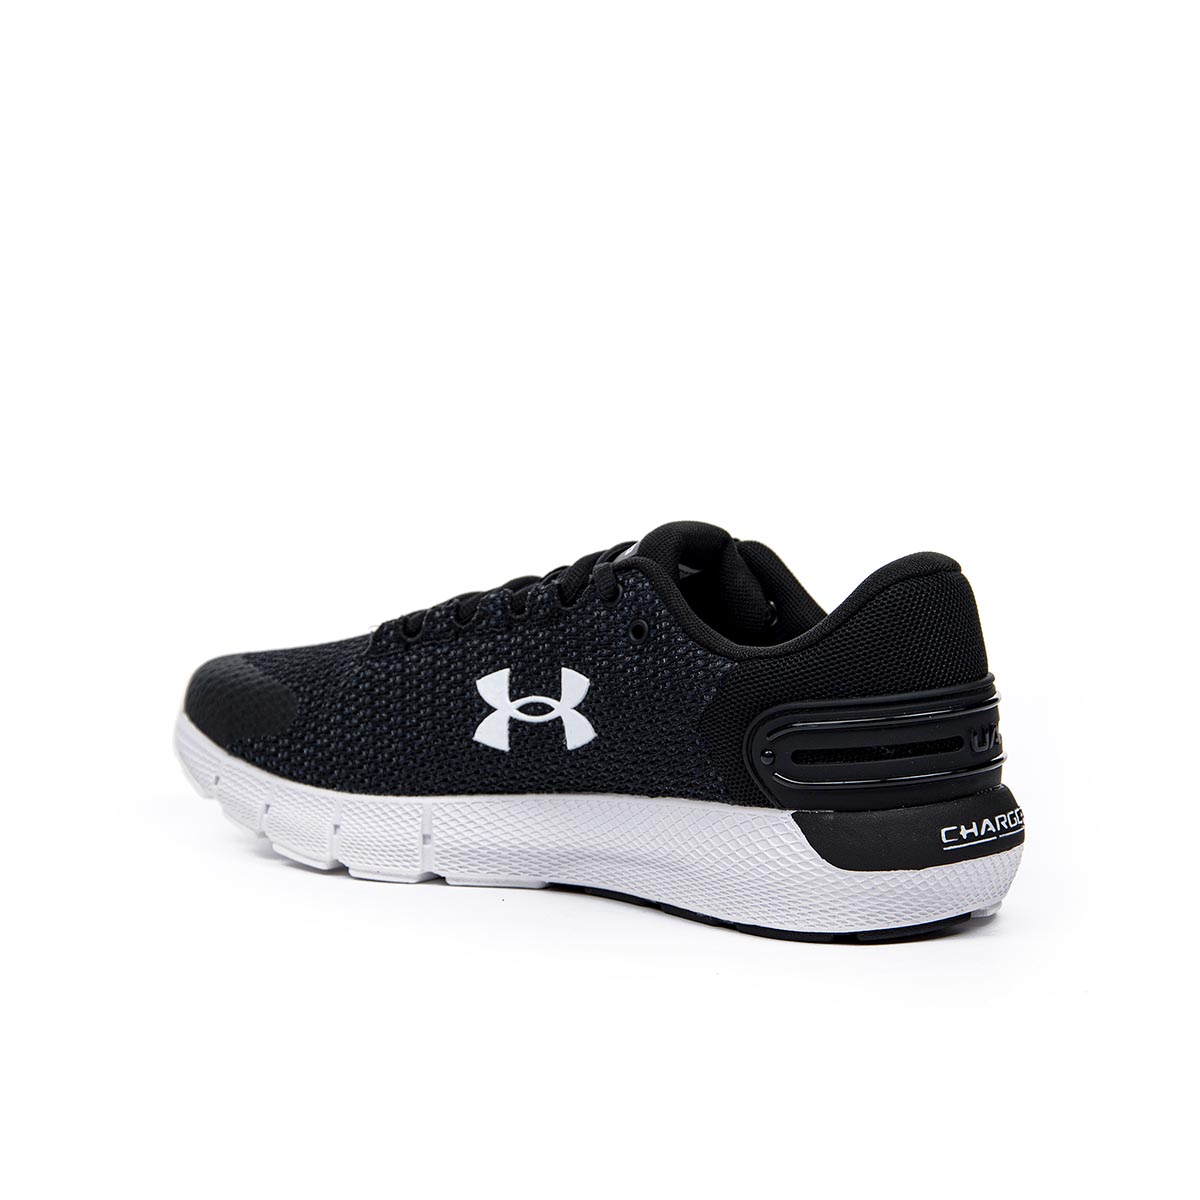 UNDER ARMOUR - CHARGED ROGUE 2.5